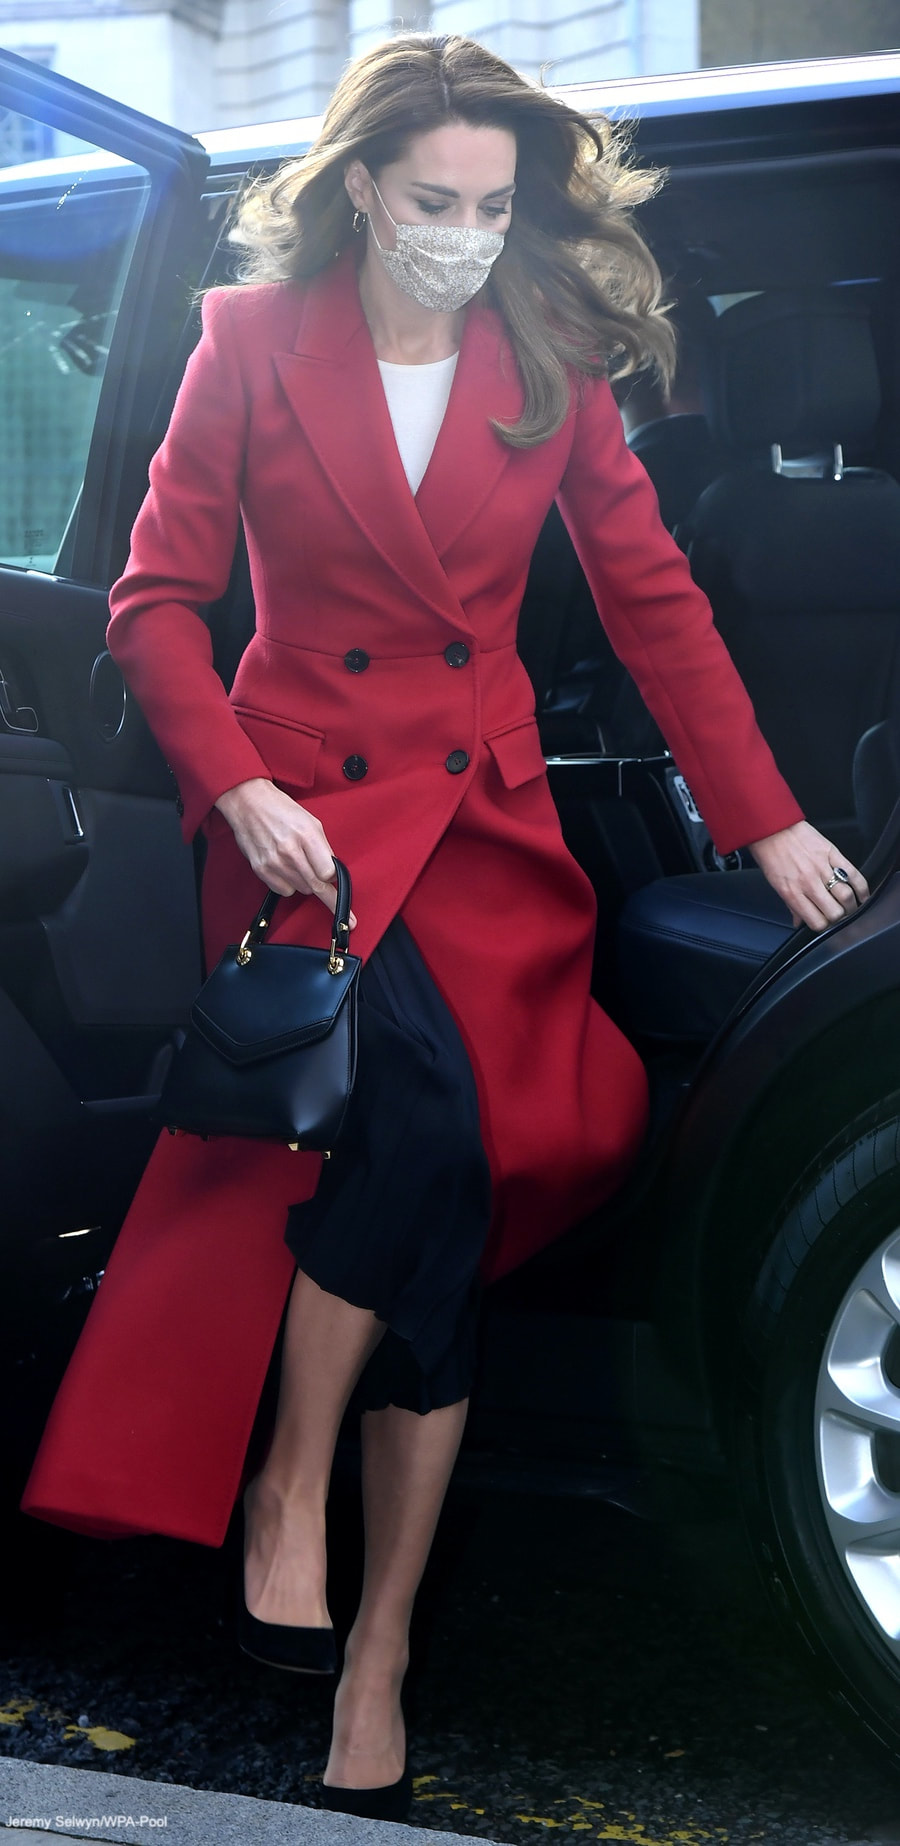 Kate Middleton Duchess of Cambridge custom made/bespoke Alexander McQueen red double breast full length coat with peak lapel for Hold Still photography project at Waterloo Station in London 